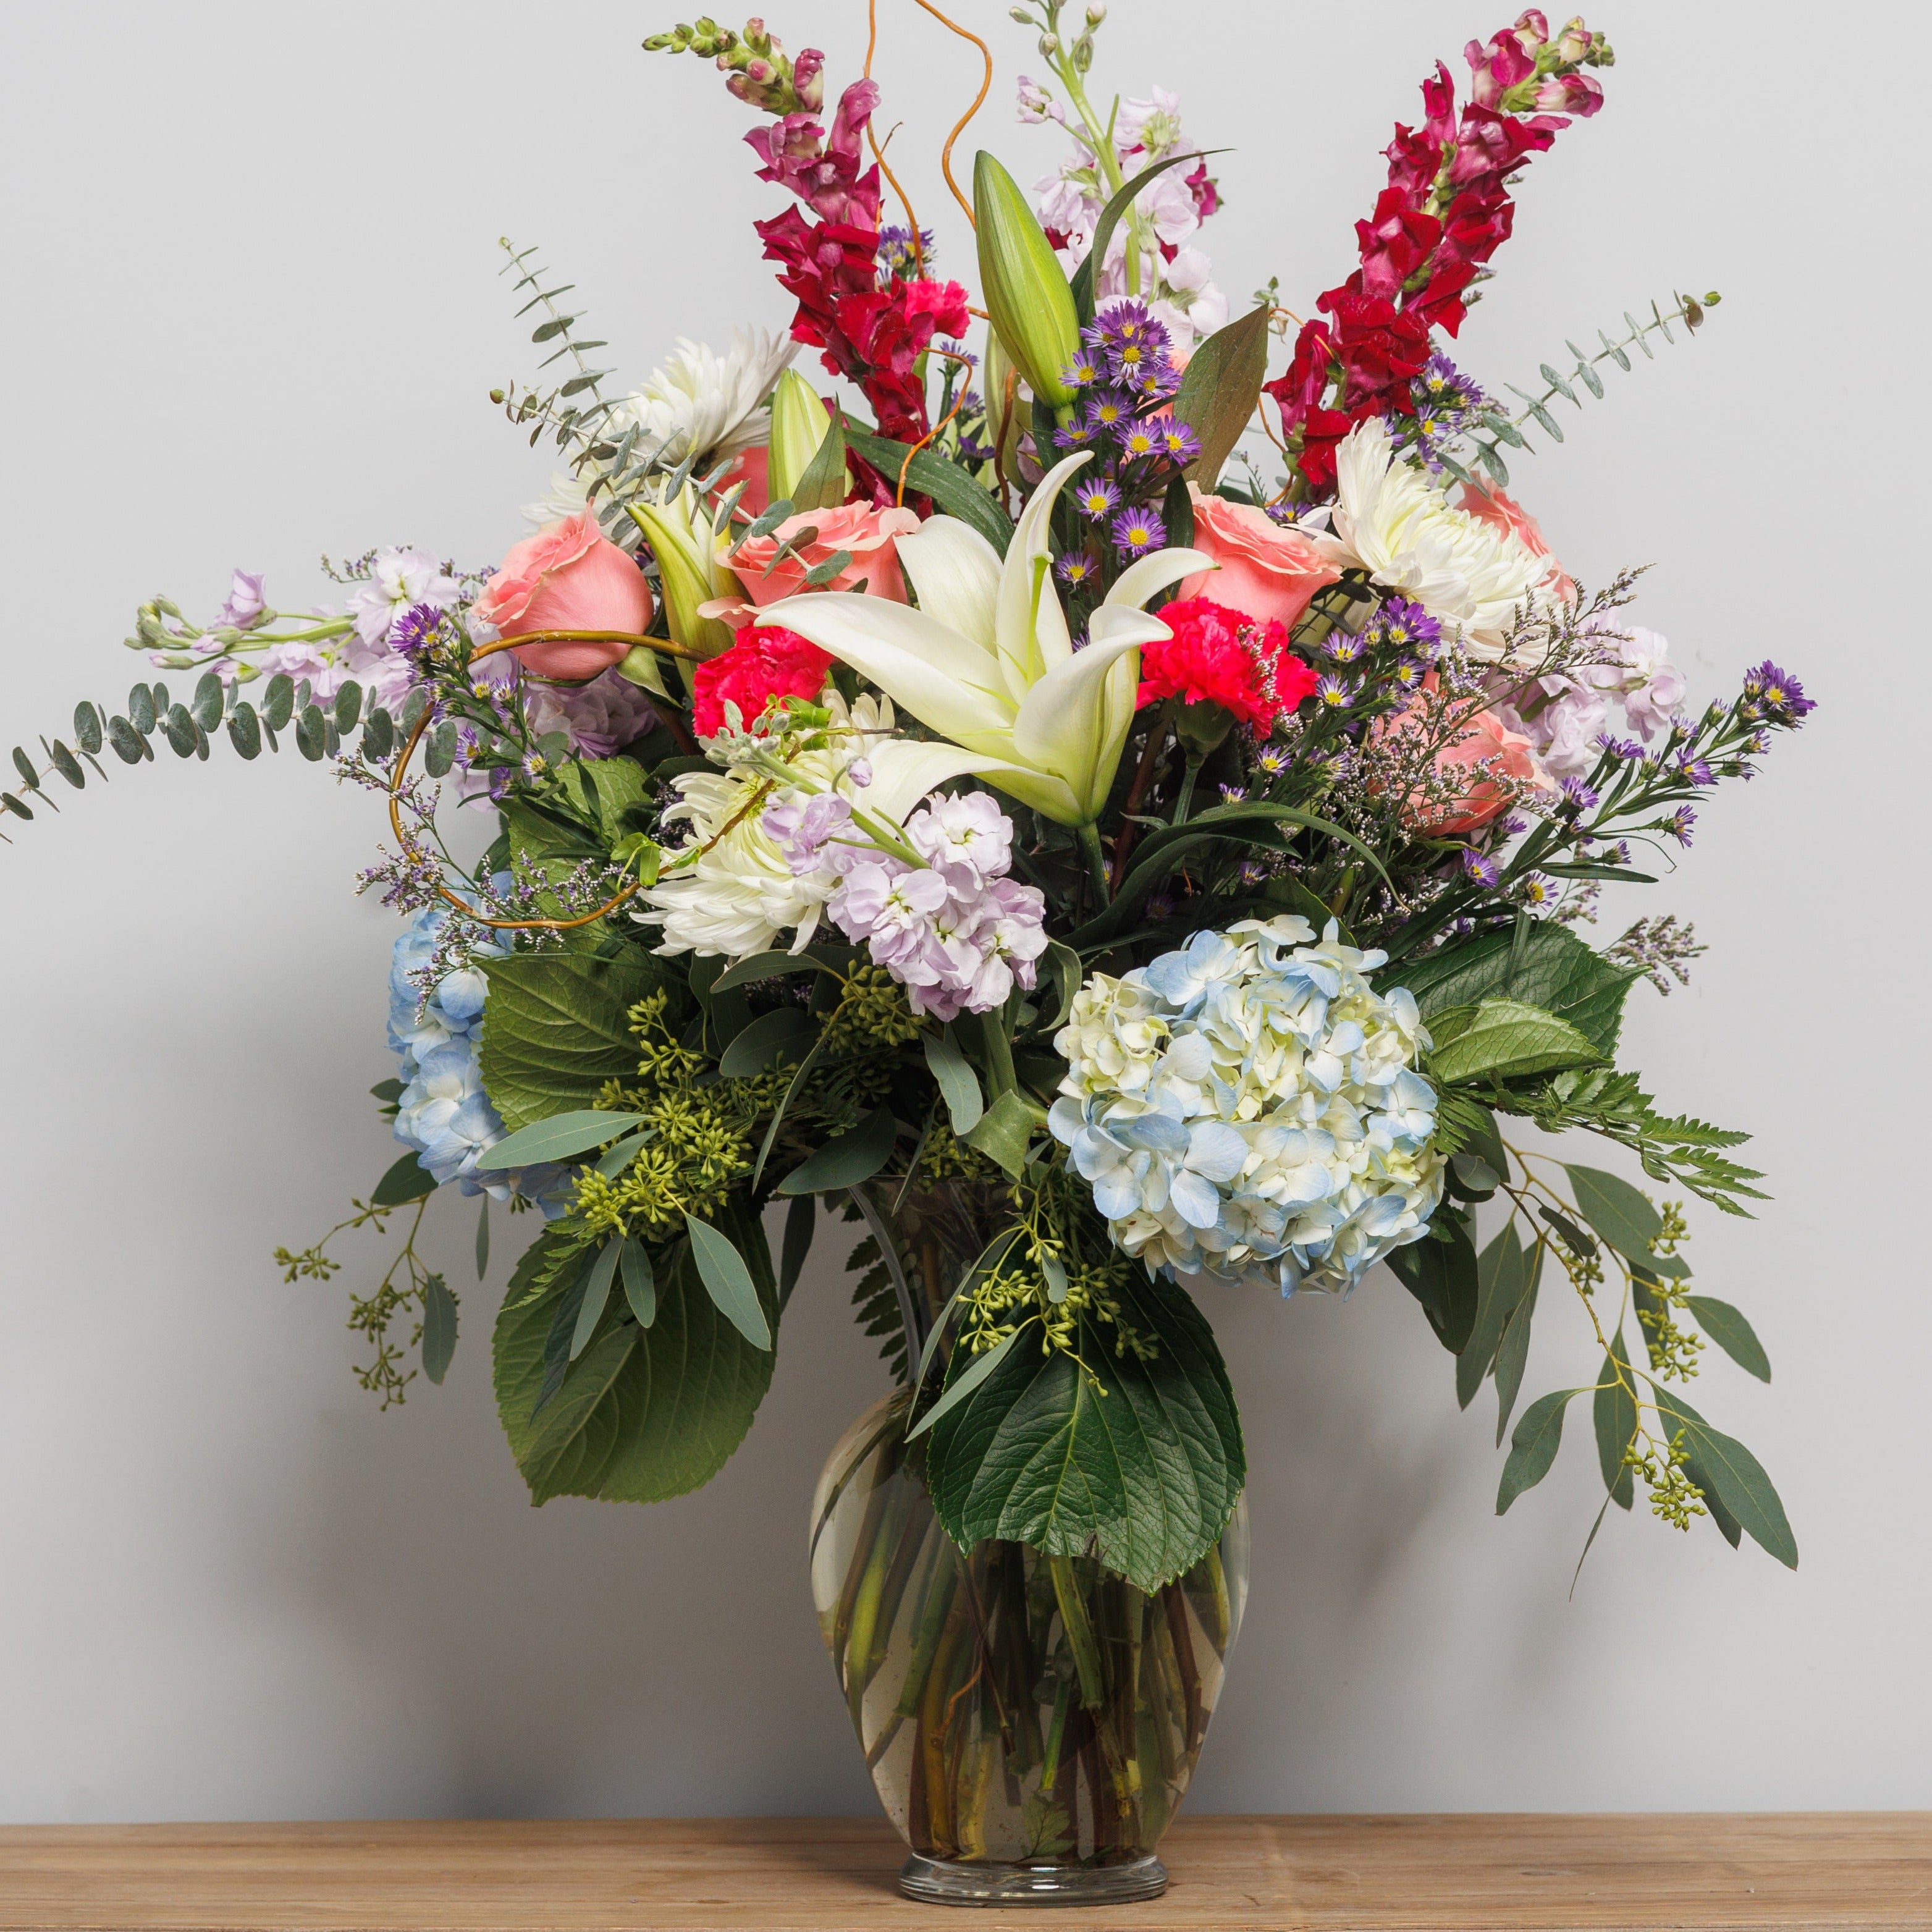 A large vase arrangement with an assortment of flowers and colors.